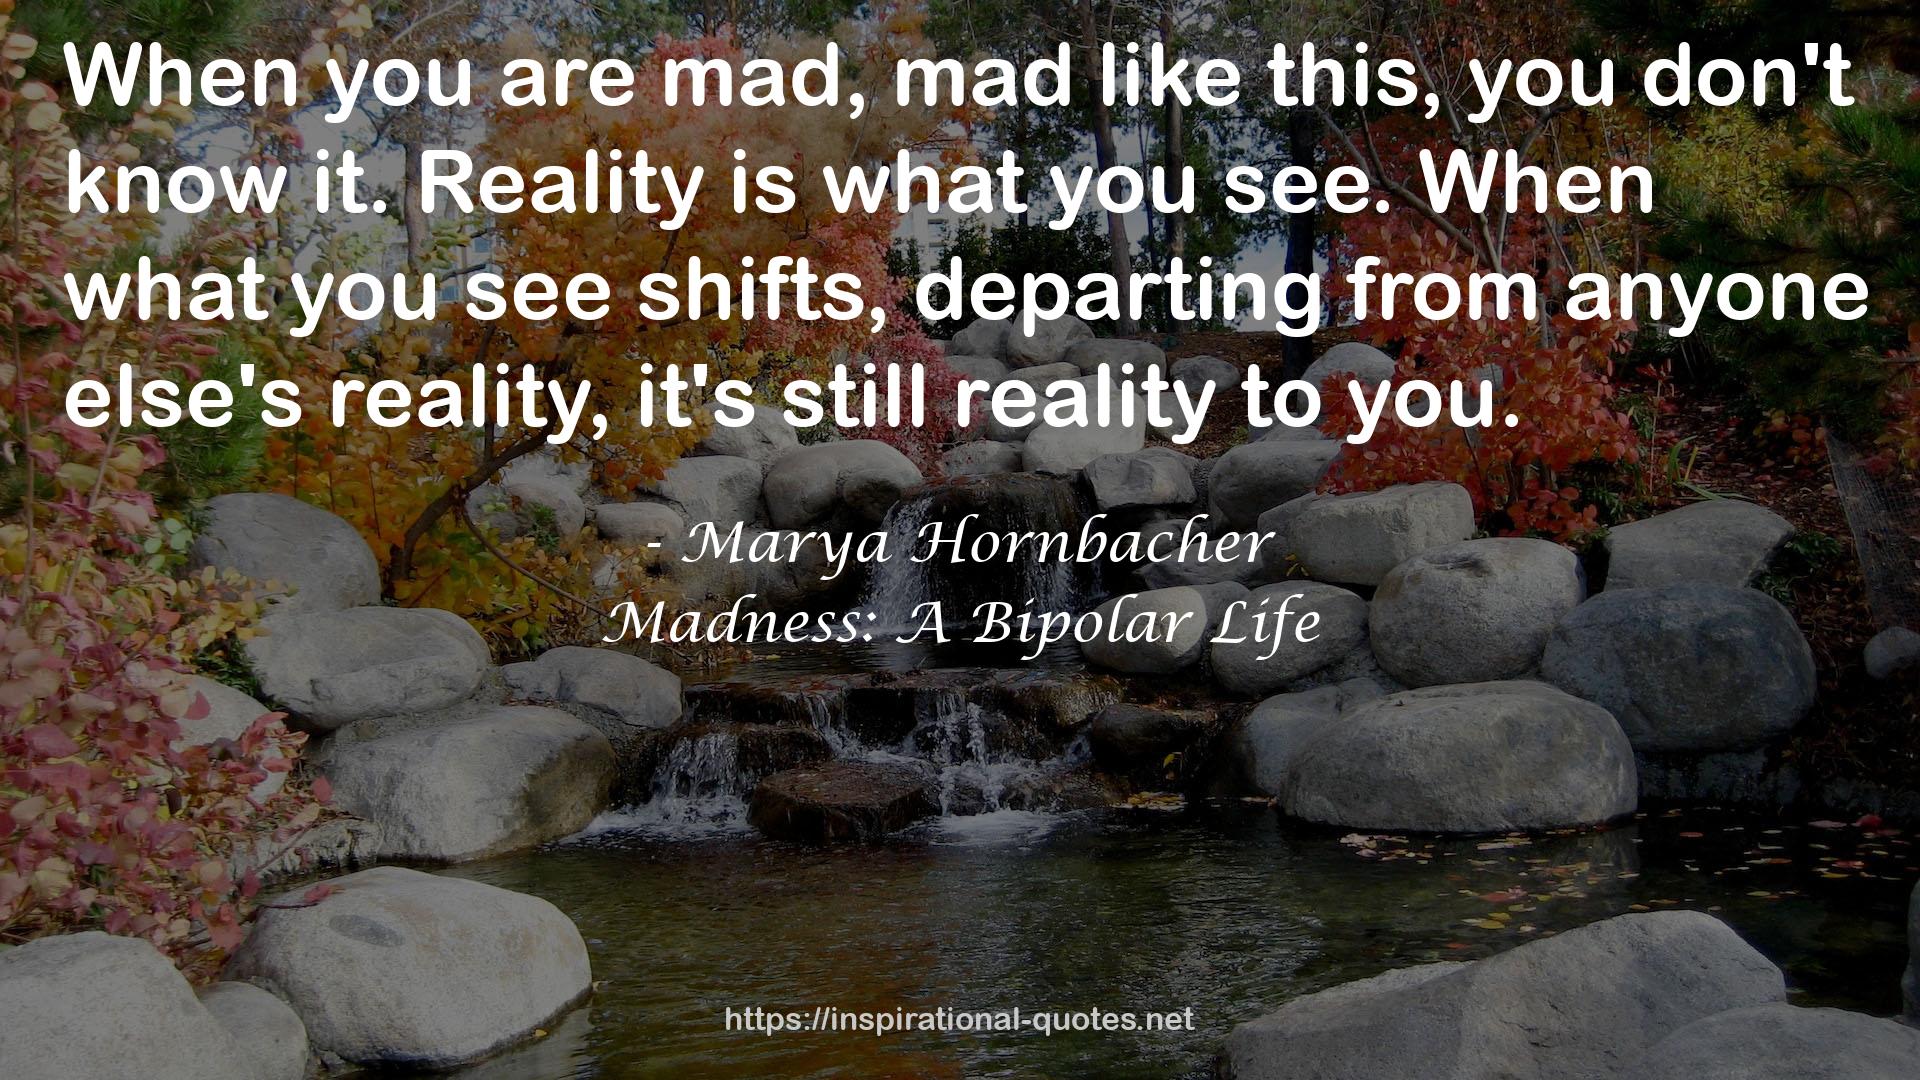 Madness: A Bipolar Life QUOTES